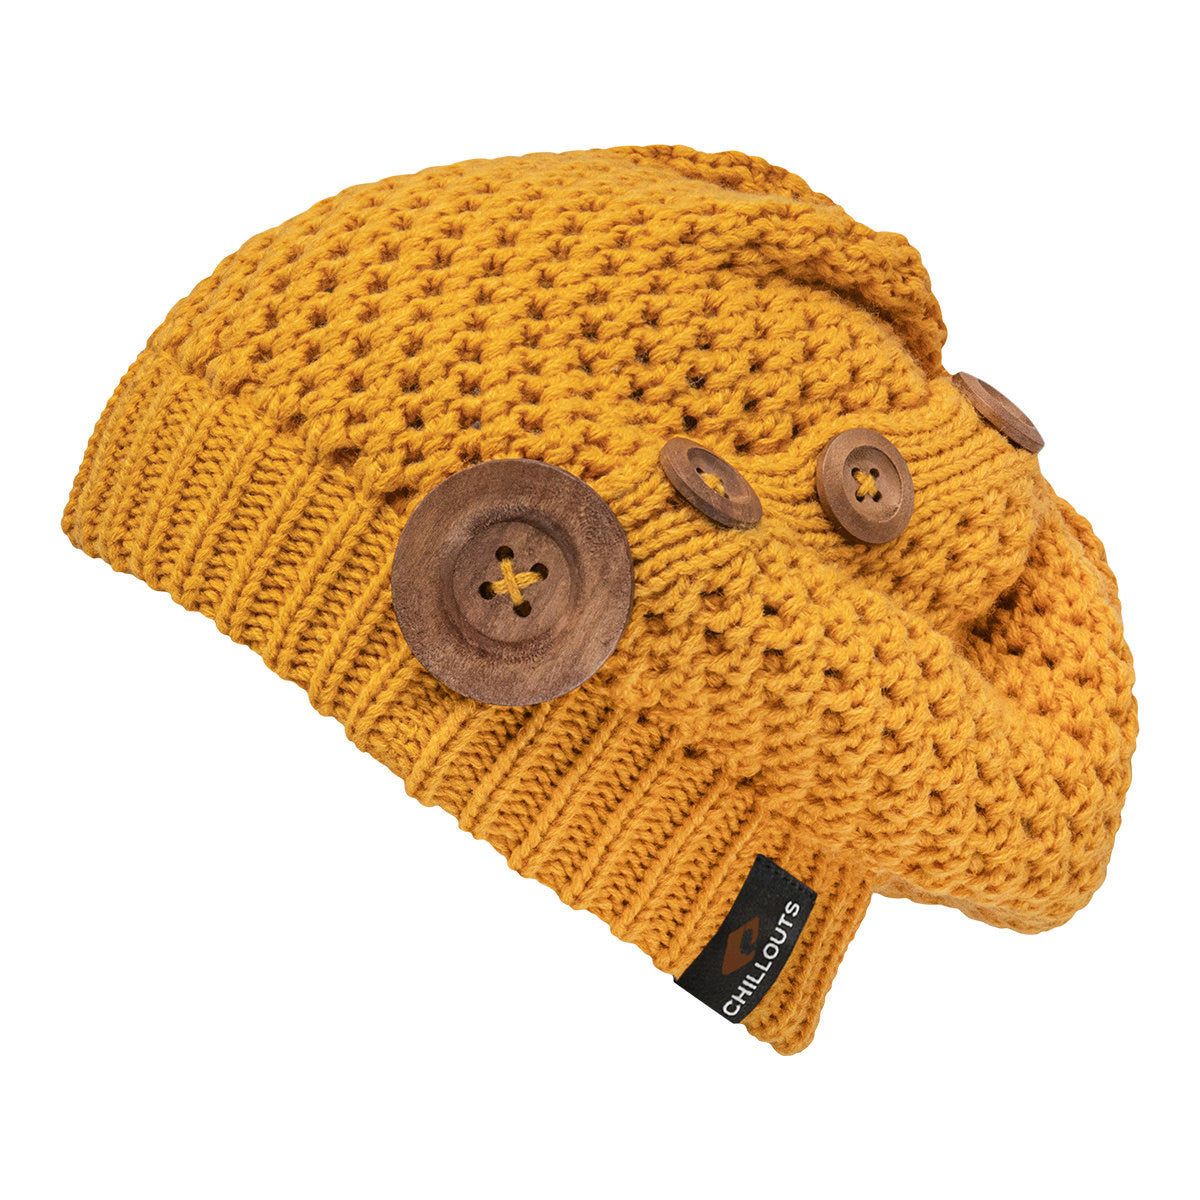 Long beanie with hole knit – Headwear for order Chillouts women pattern now! 